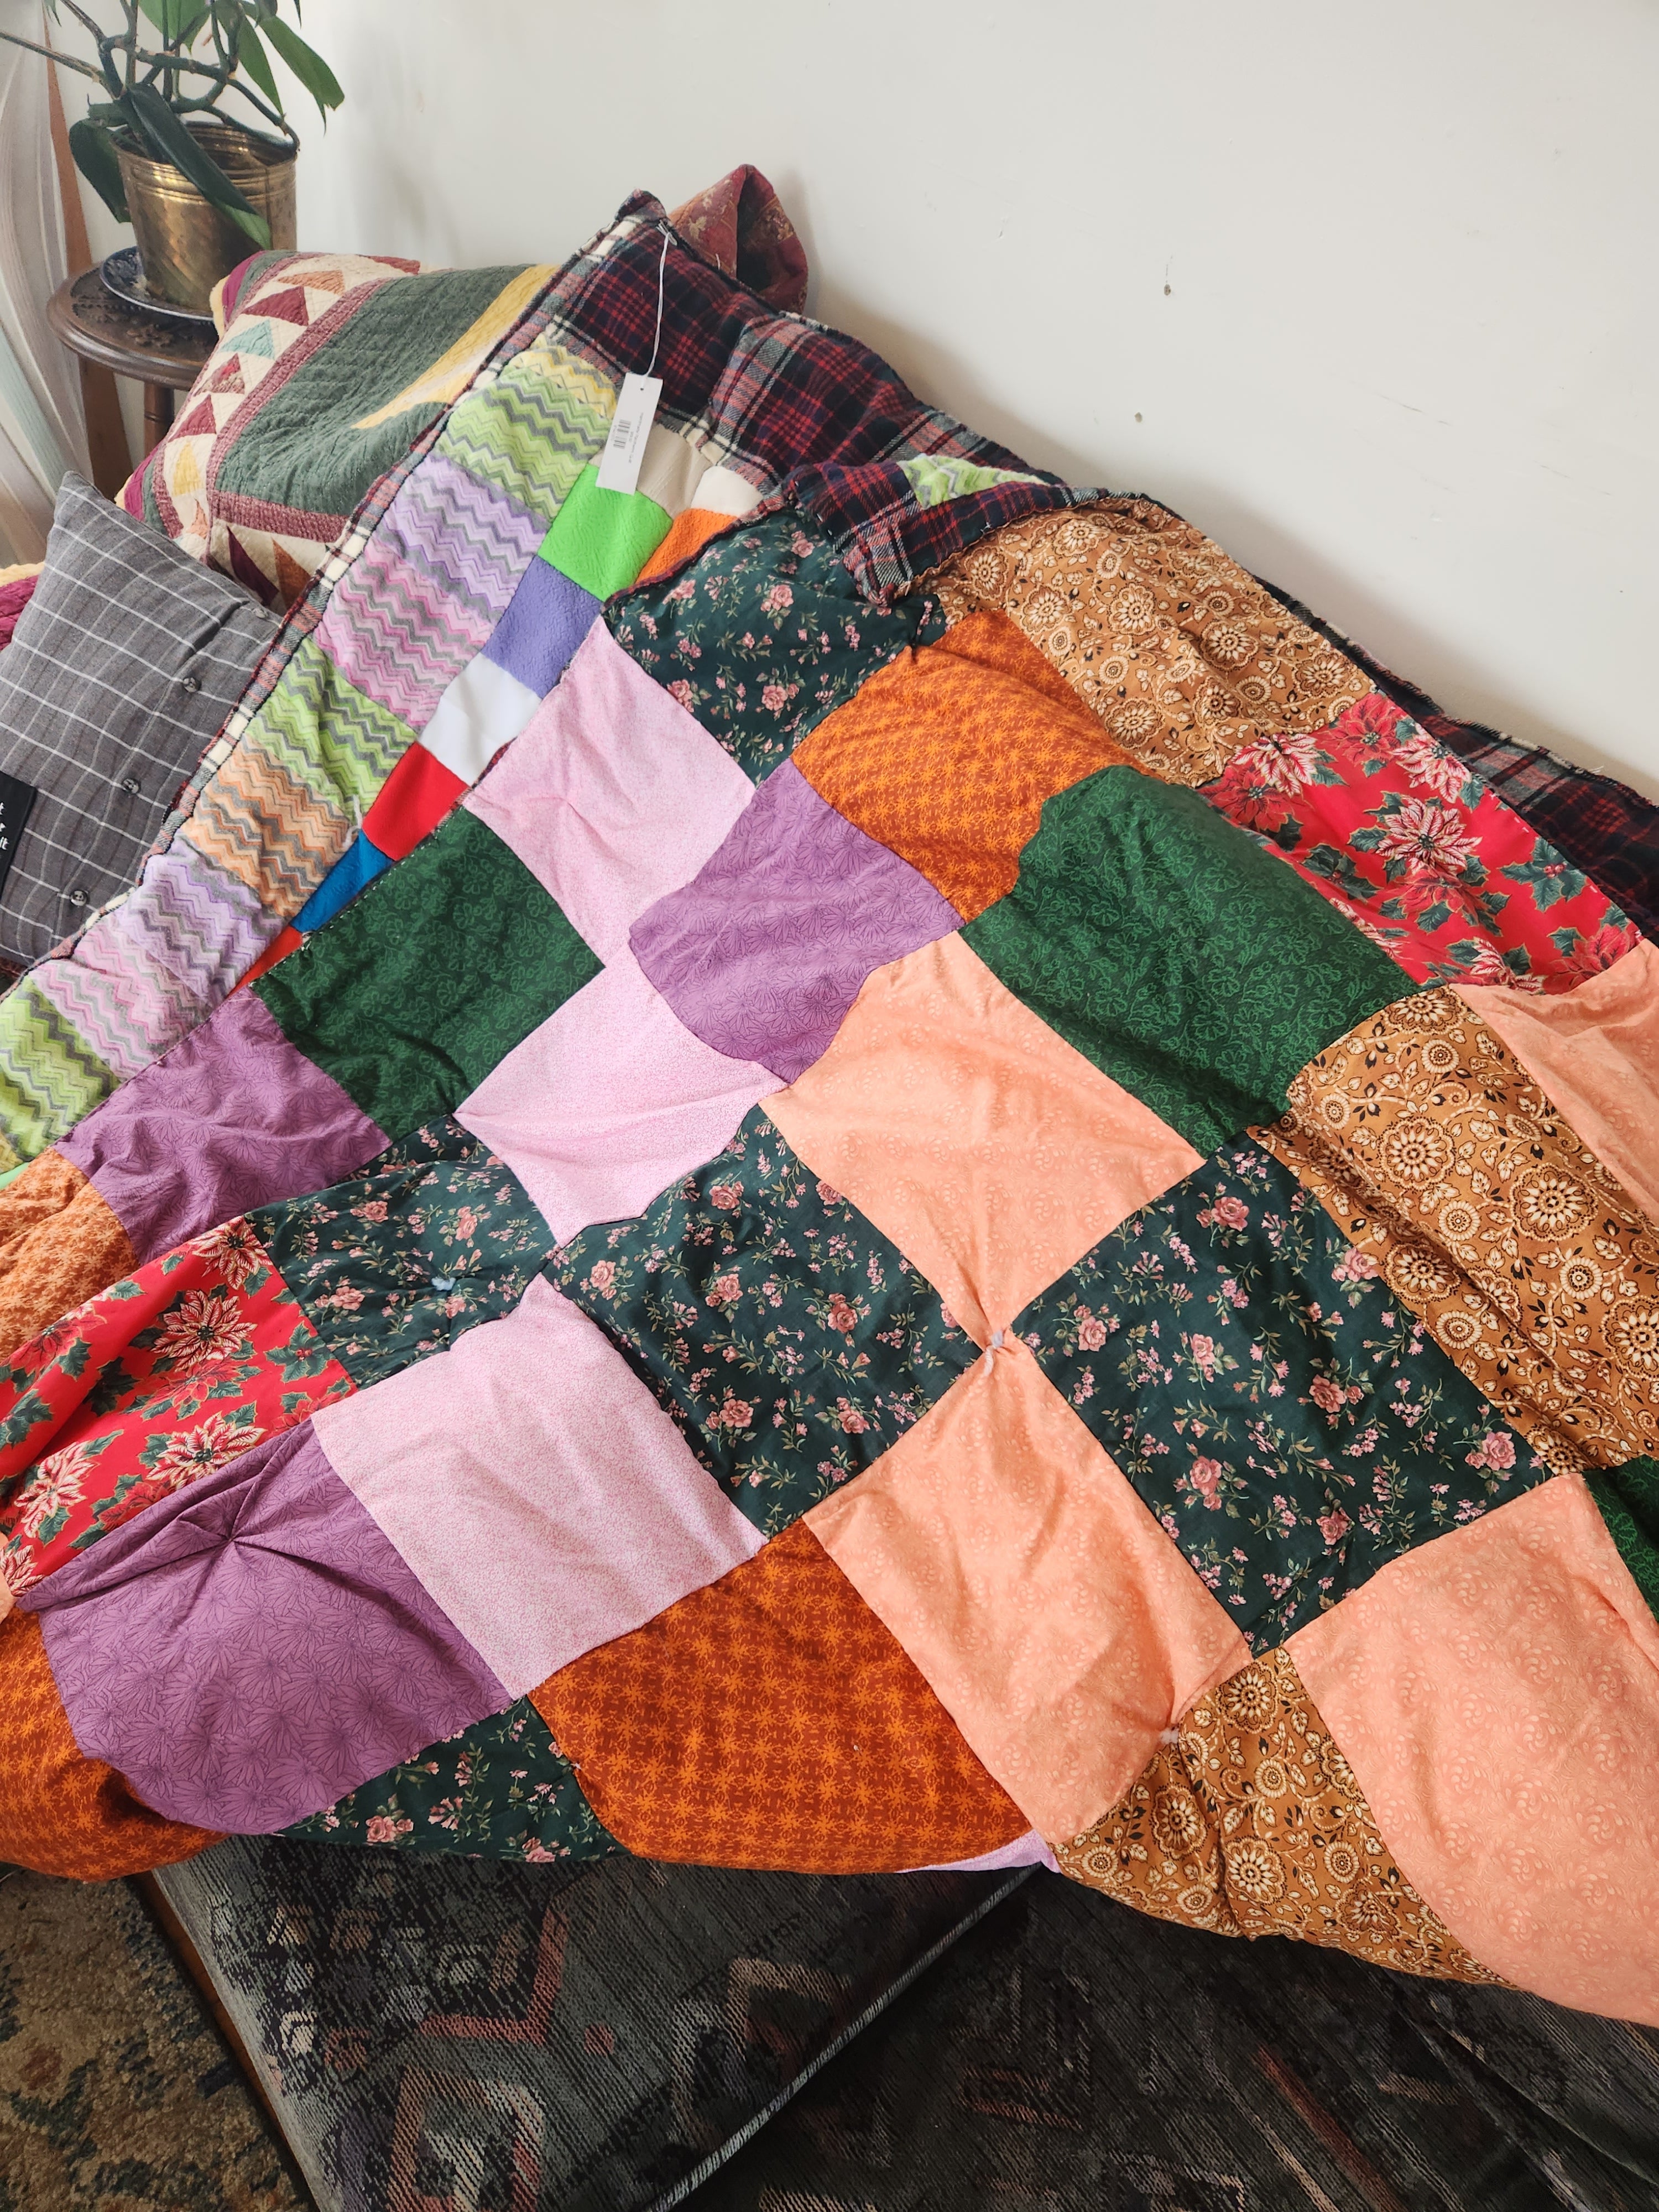 Blankets and Textiles – Vintage Spaces Market